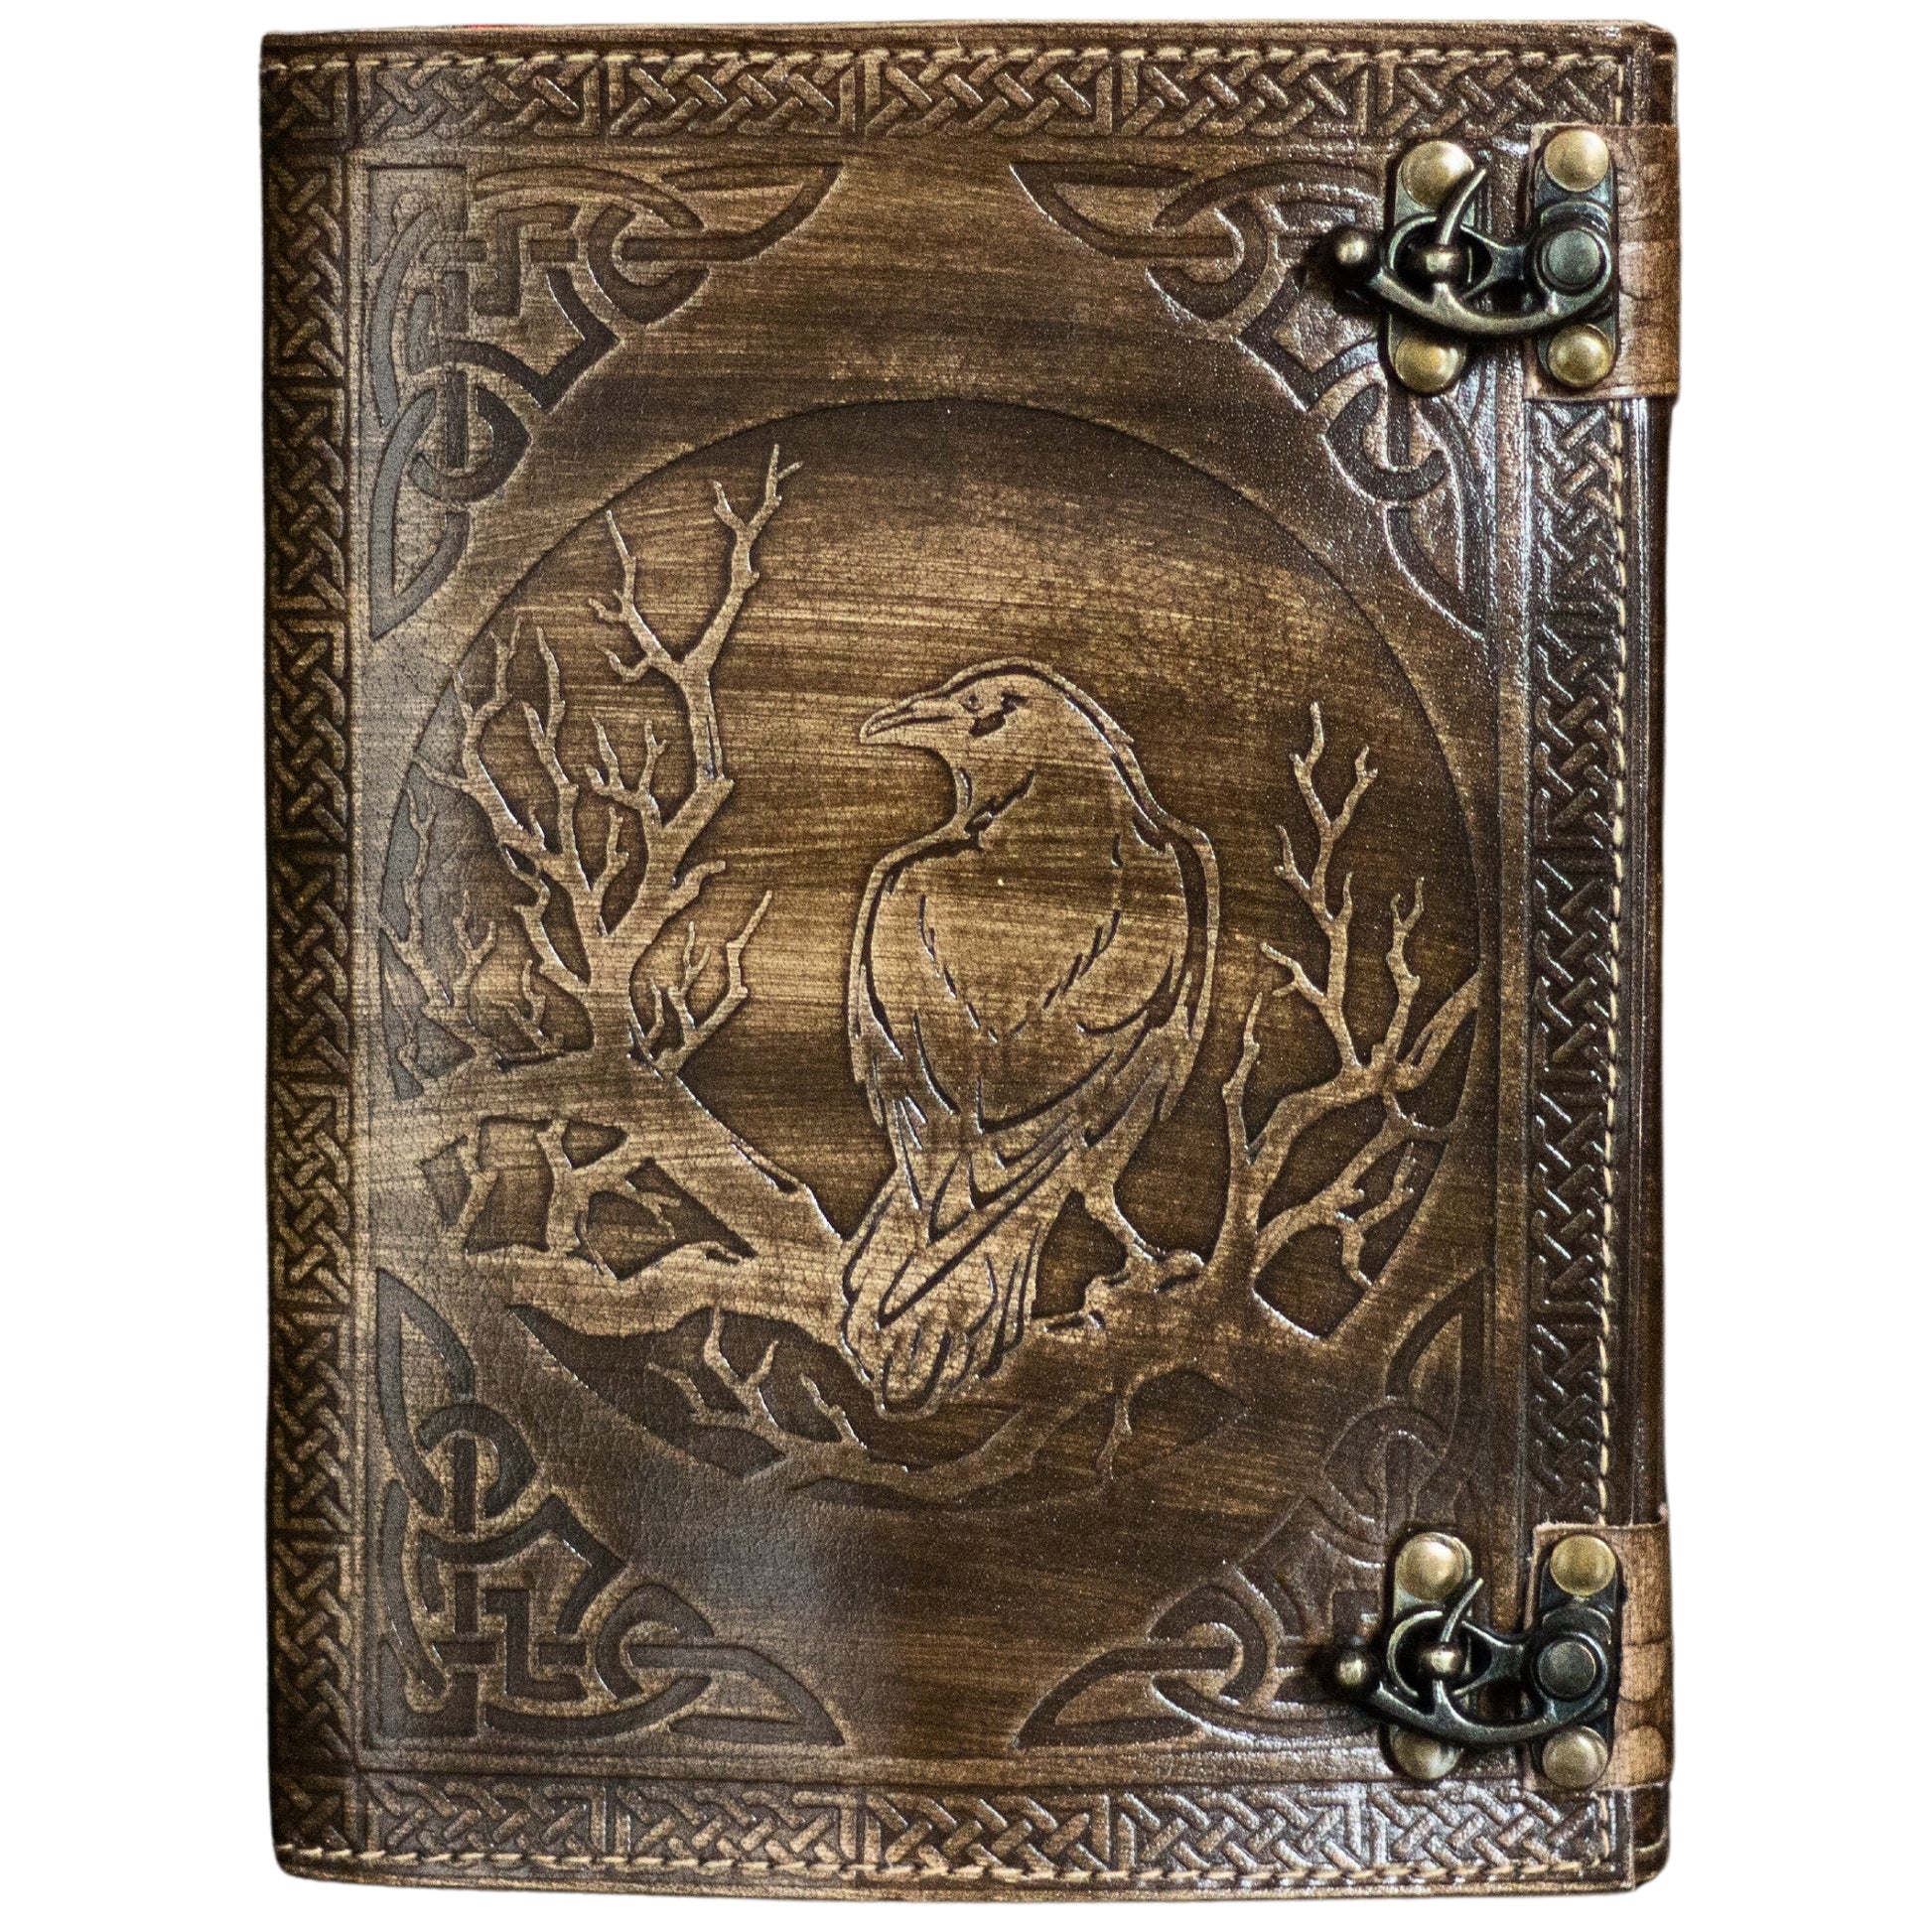 BROWN LEATHER BOUND JOURNAL - DECKLE EDGE WATERCOLOR PAPER